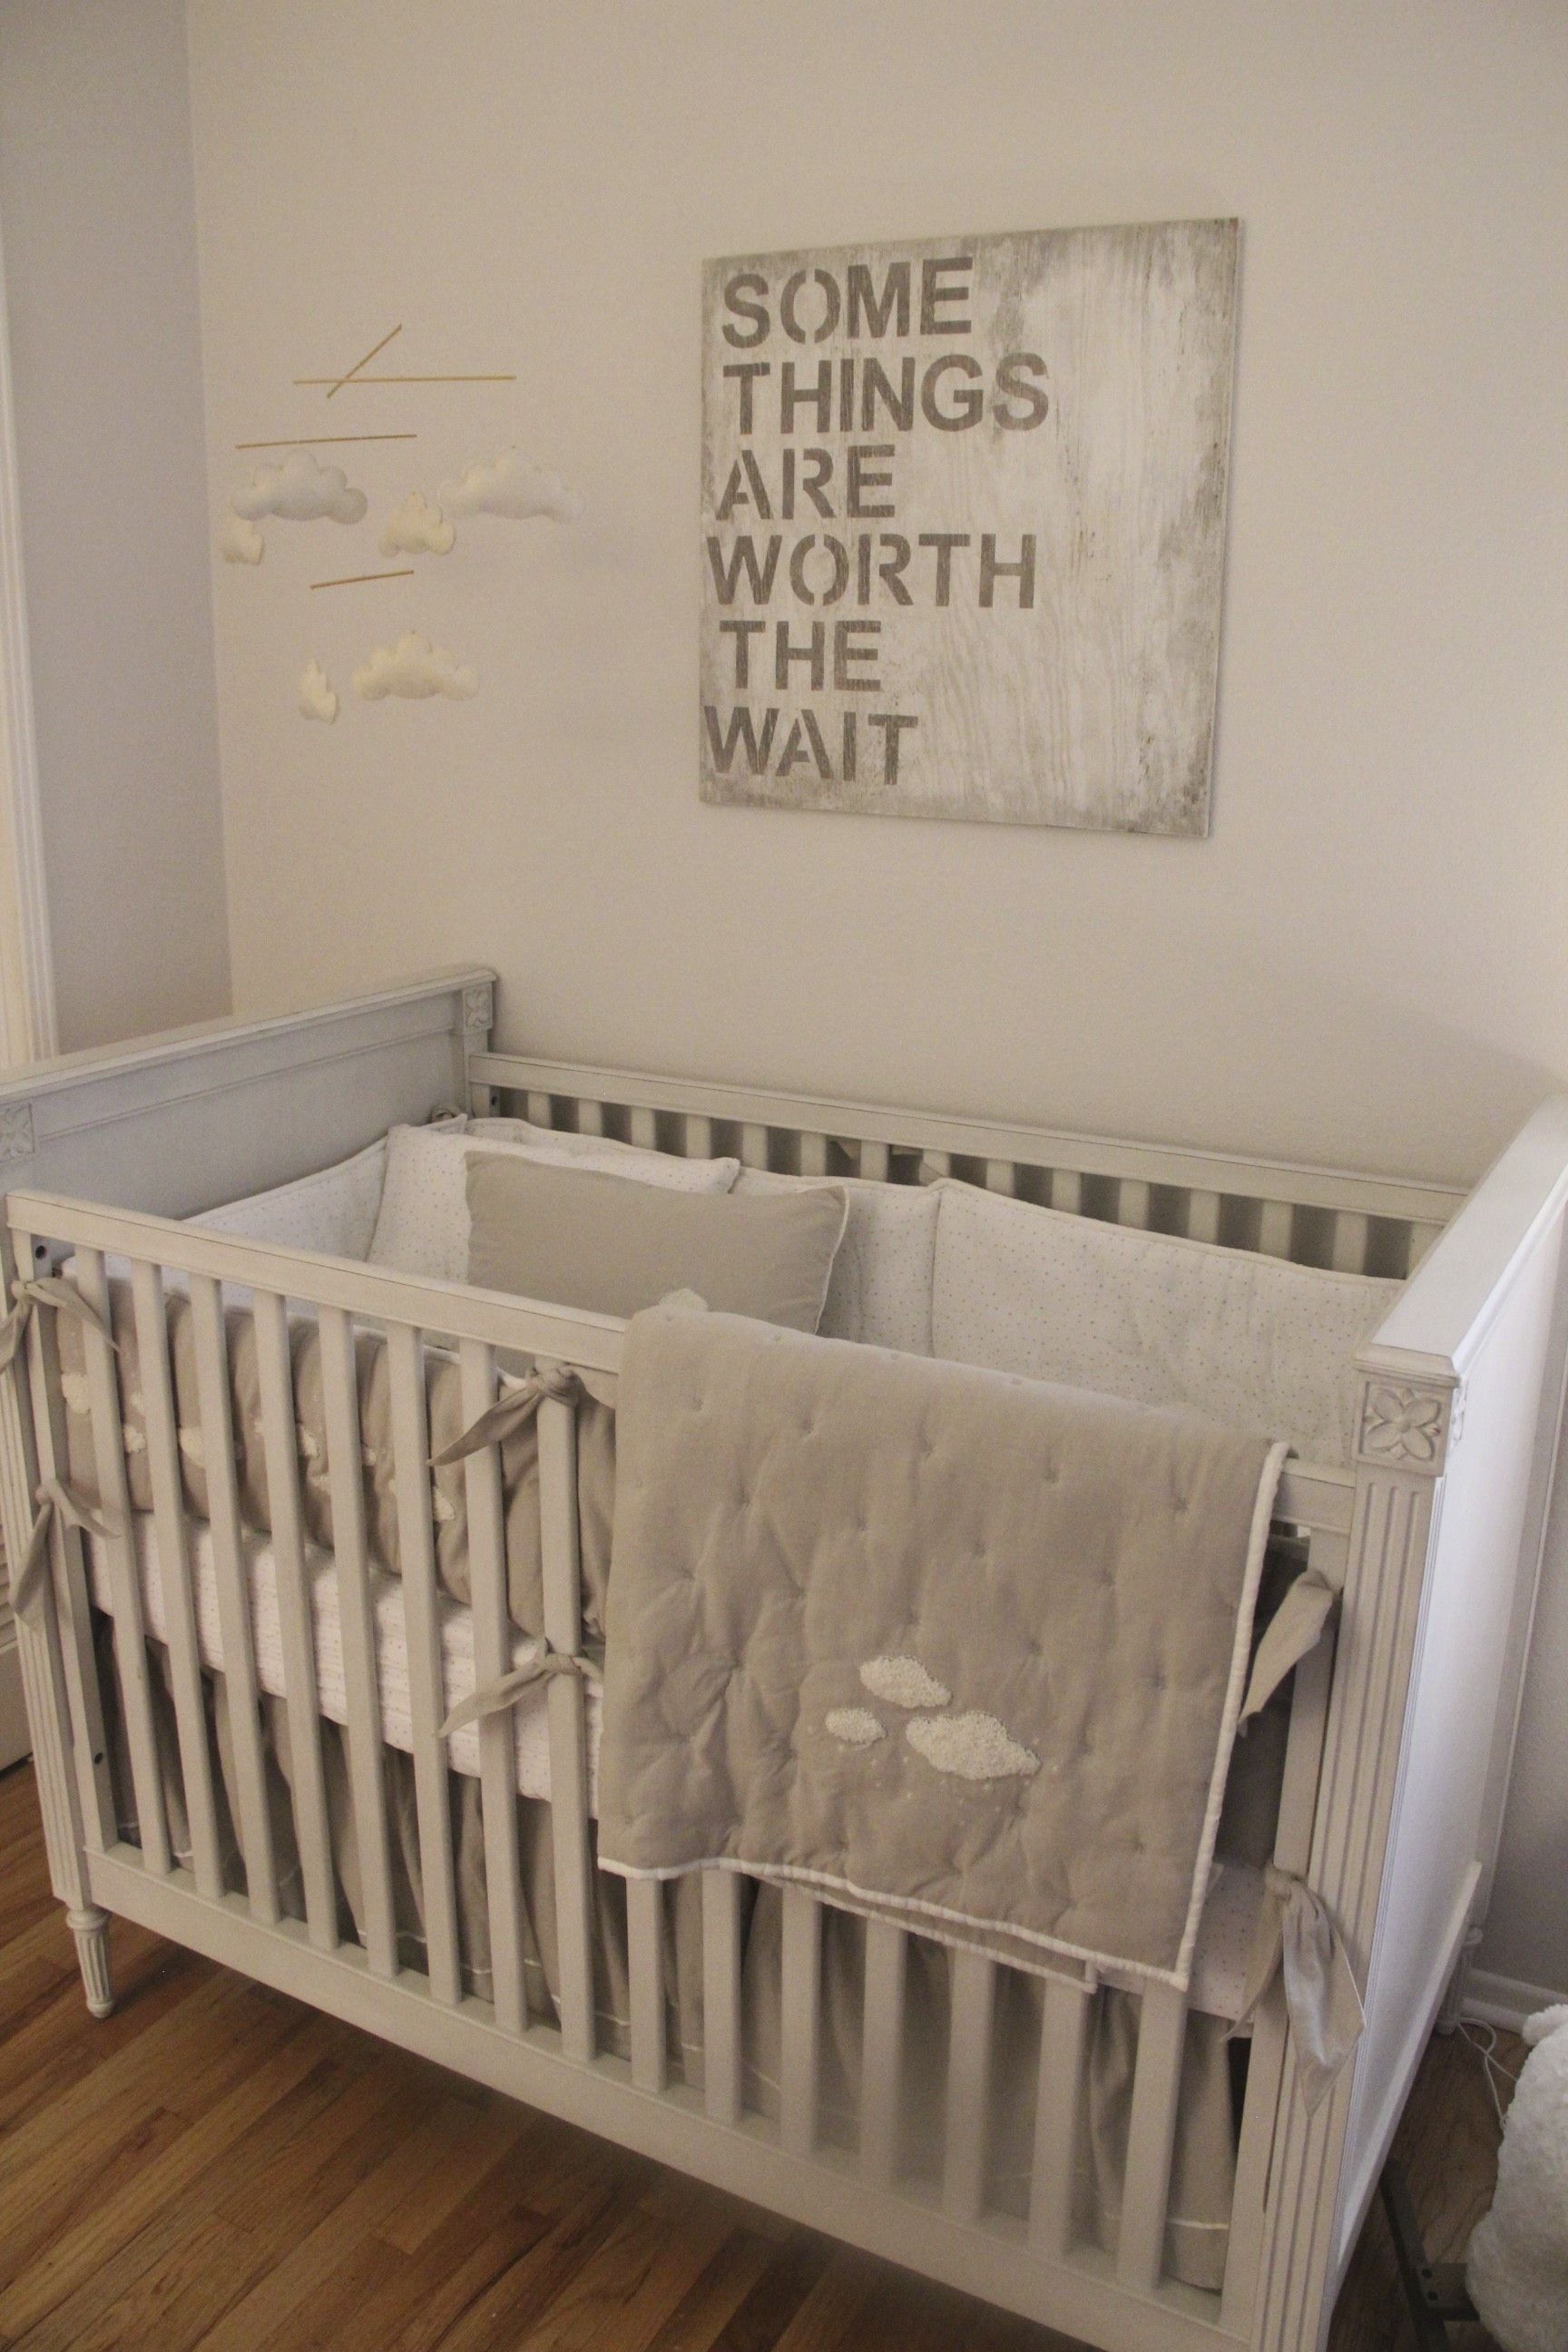 A calm and serene nursery for our little boy inspired by the soft clouds crib bedding. We went with light, airy colors and stayed